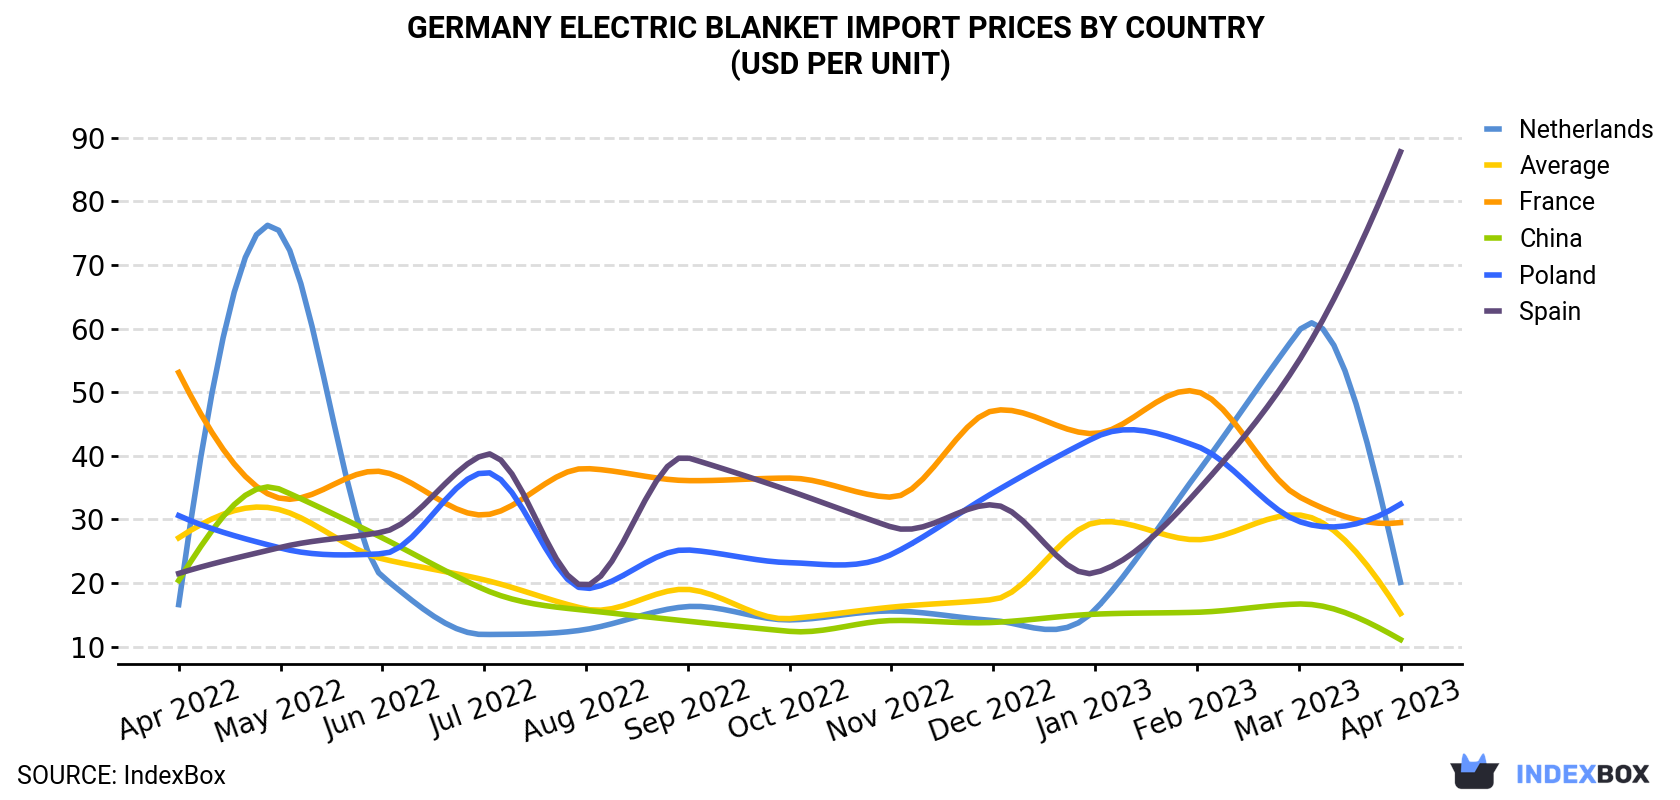 Germany Electric Blanket Import Prices By Country (USD Per Unit)